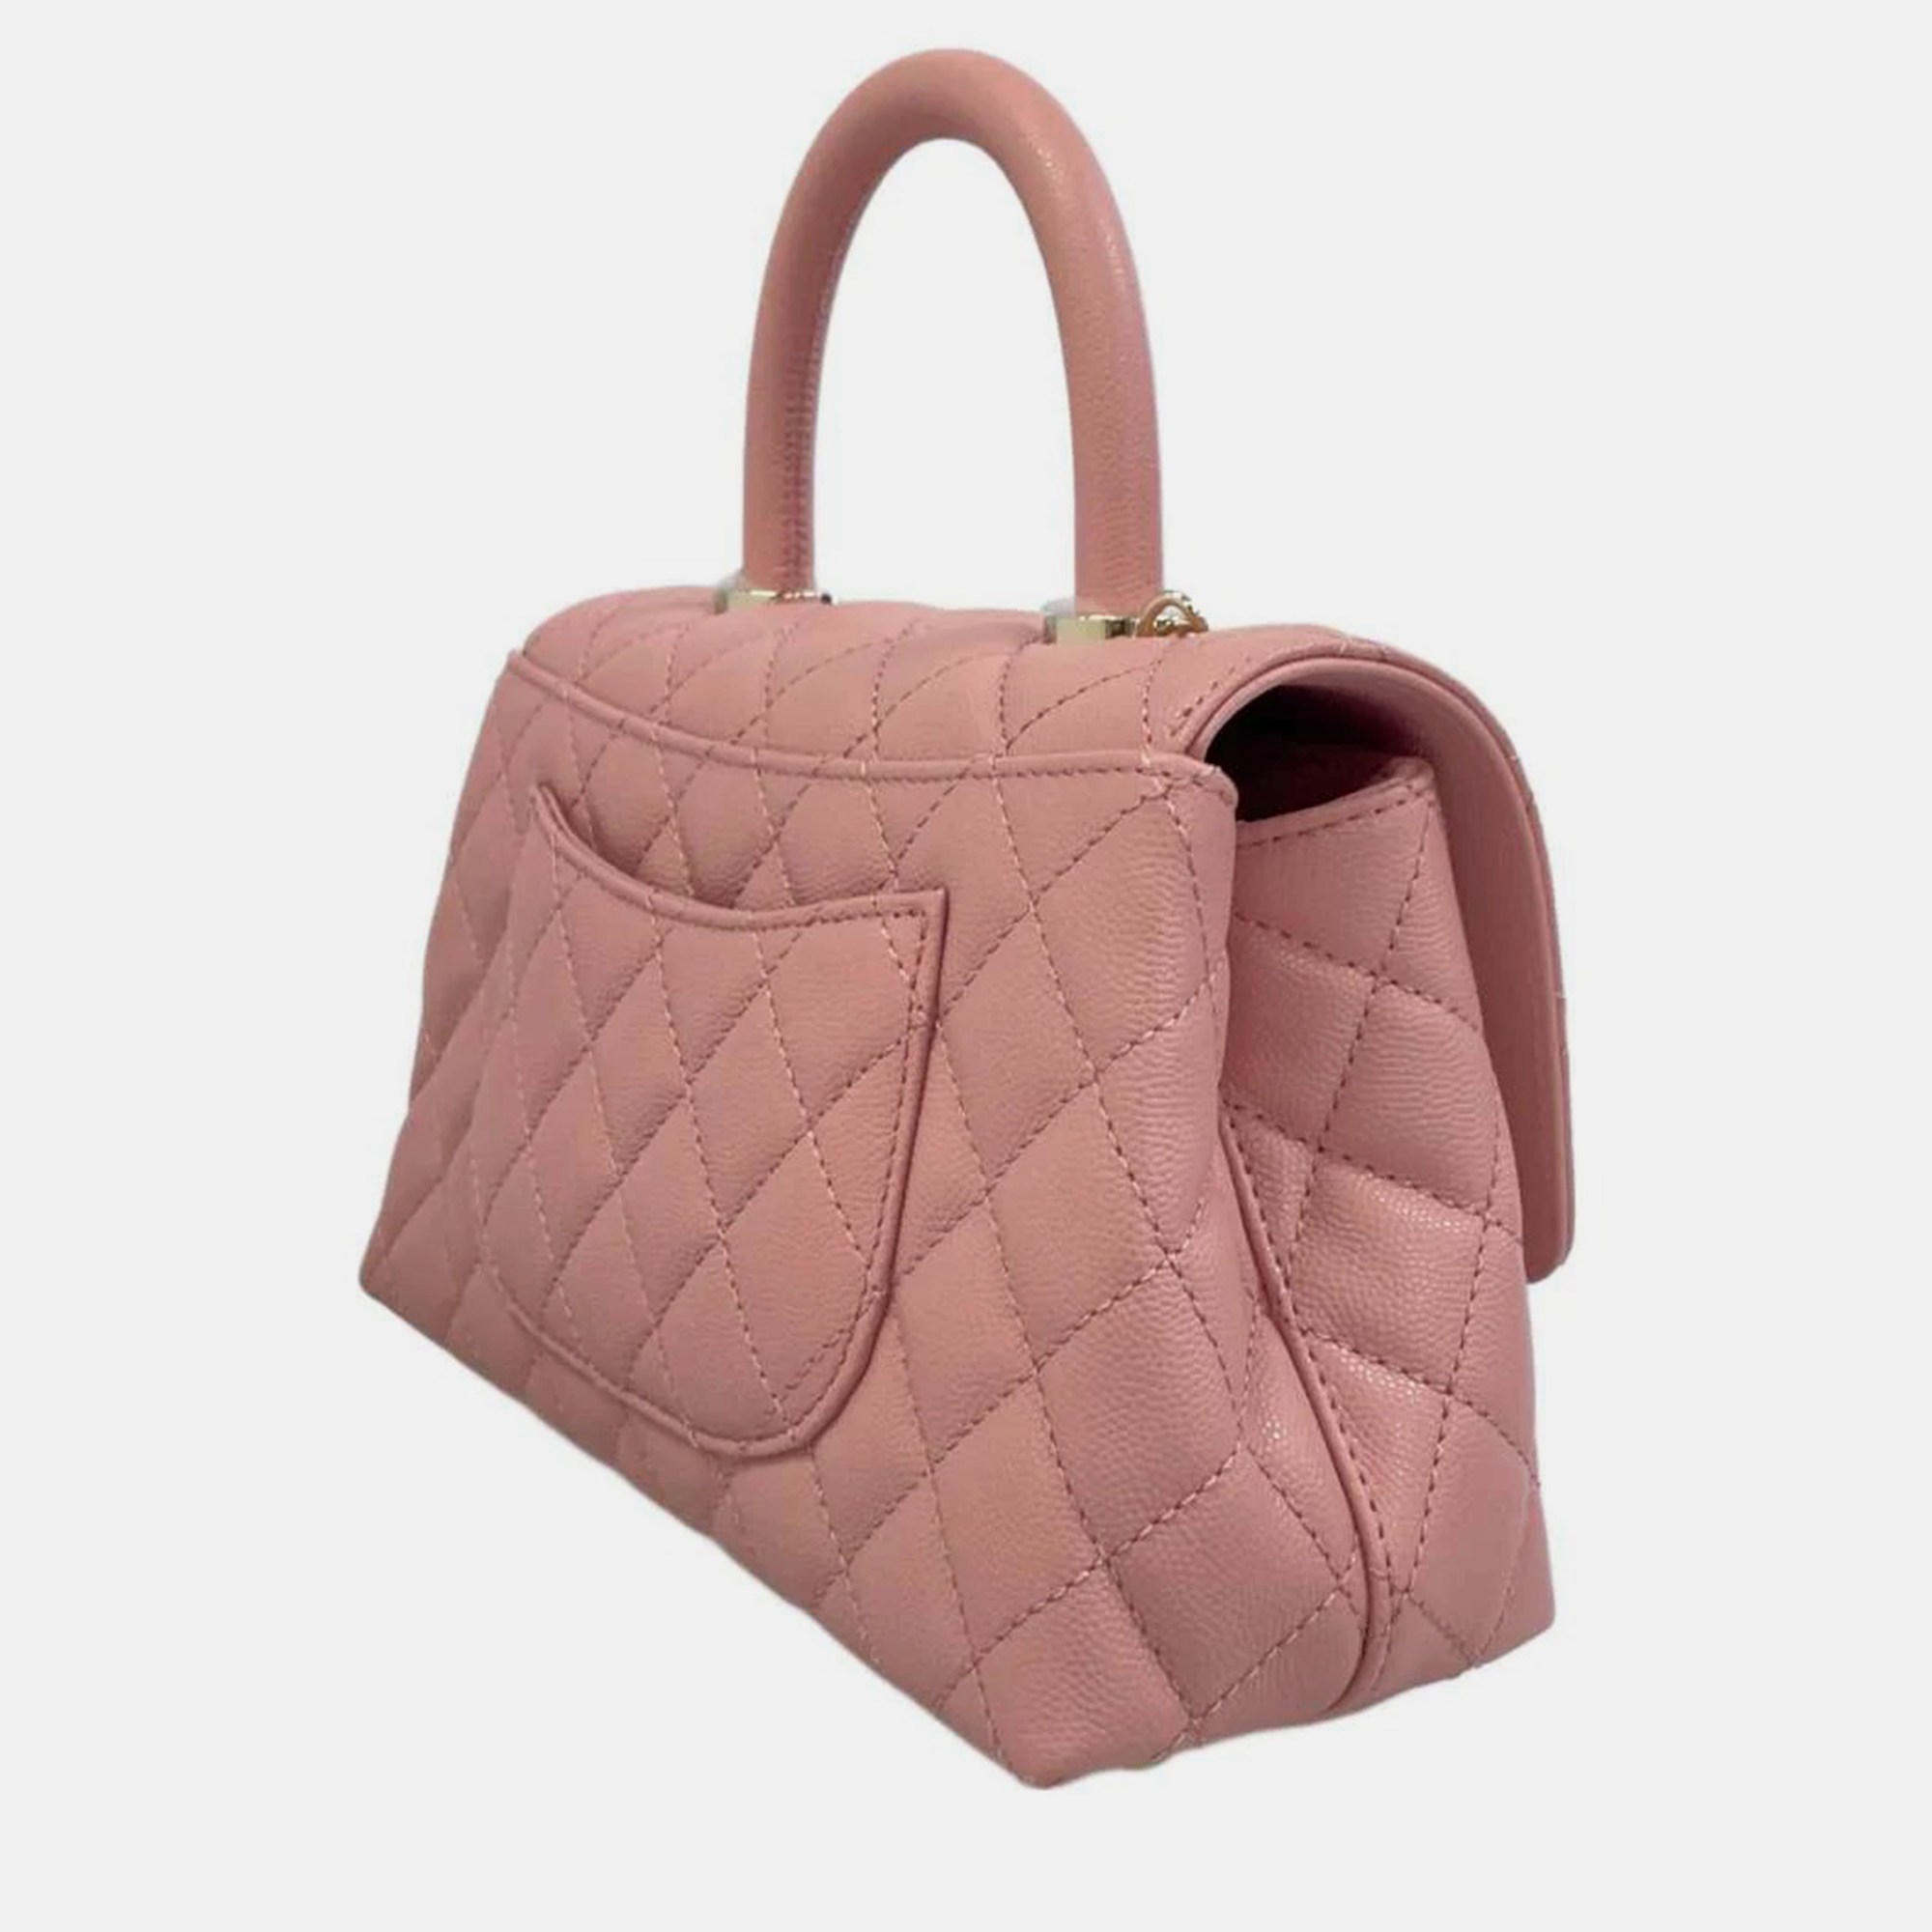 Chanel Pink Caviar Leather Coco Top Handle Bag